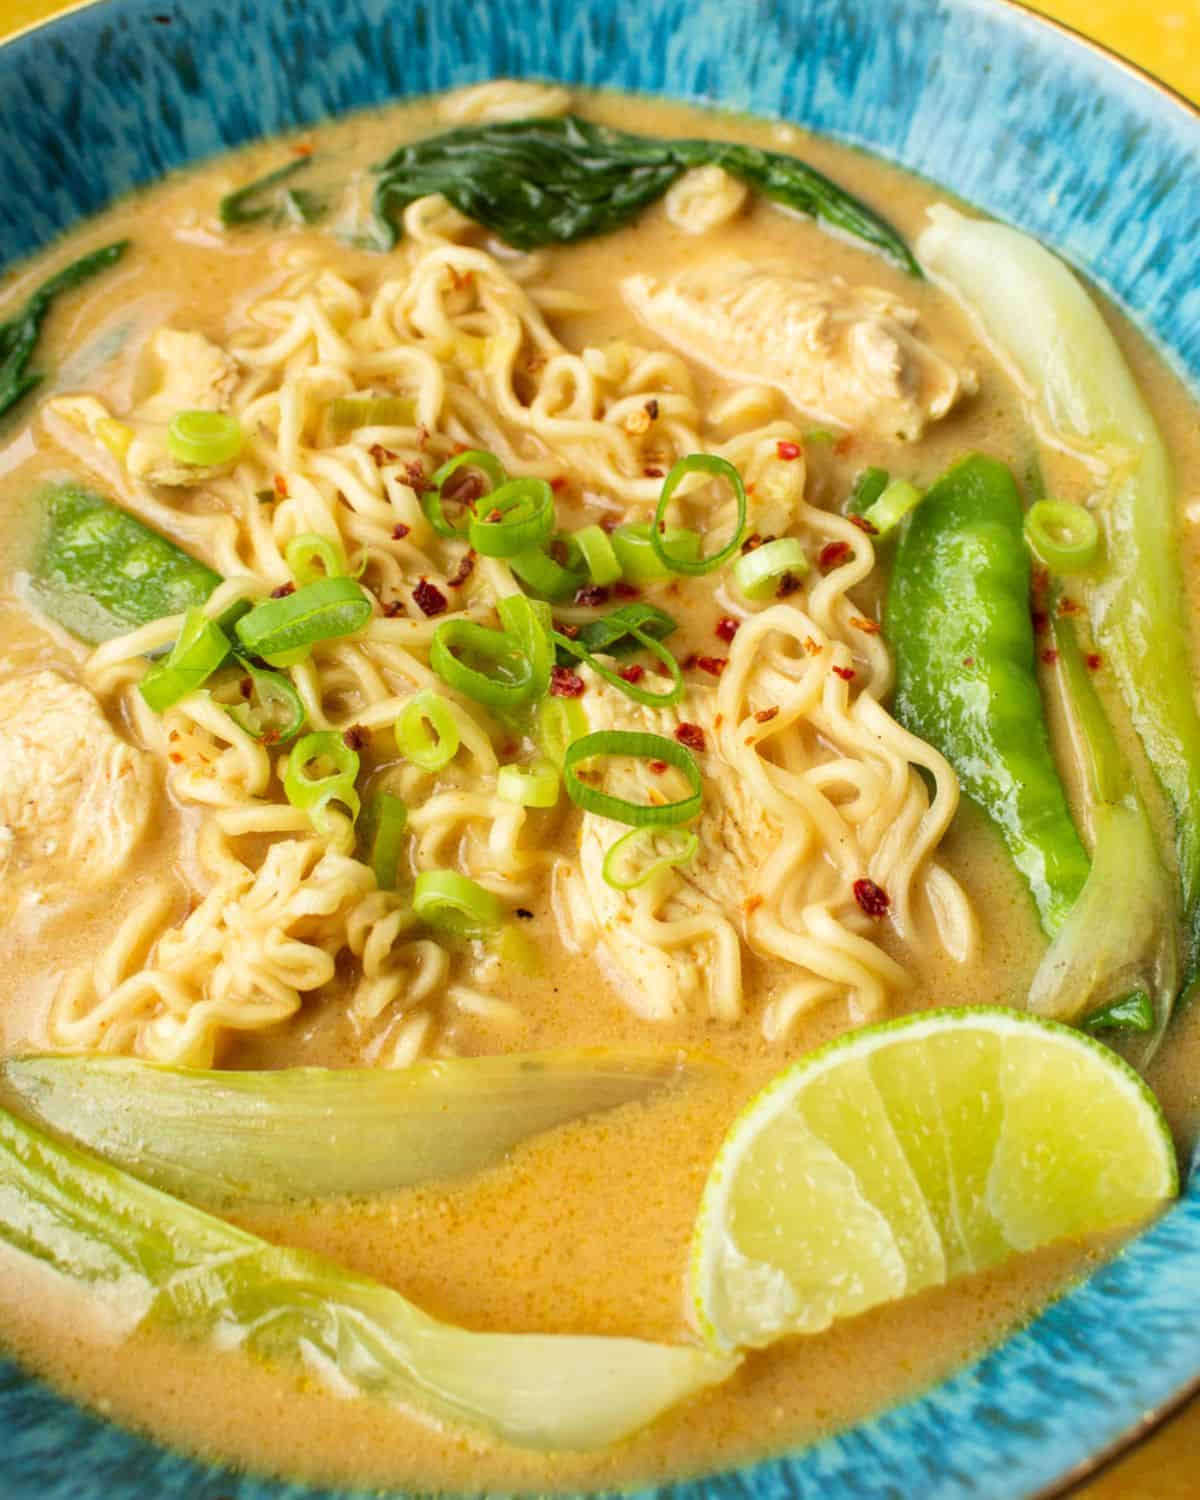 Chicken ramen in a blue bowl with mange tout, noodles, pack choi and sliced spring onions on top with a wedge of lime.